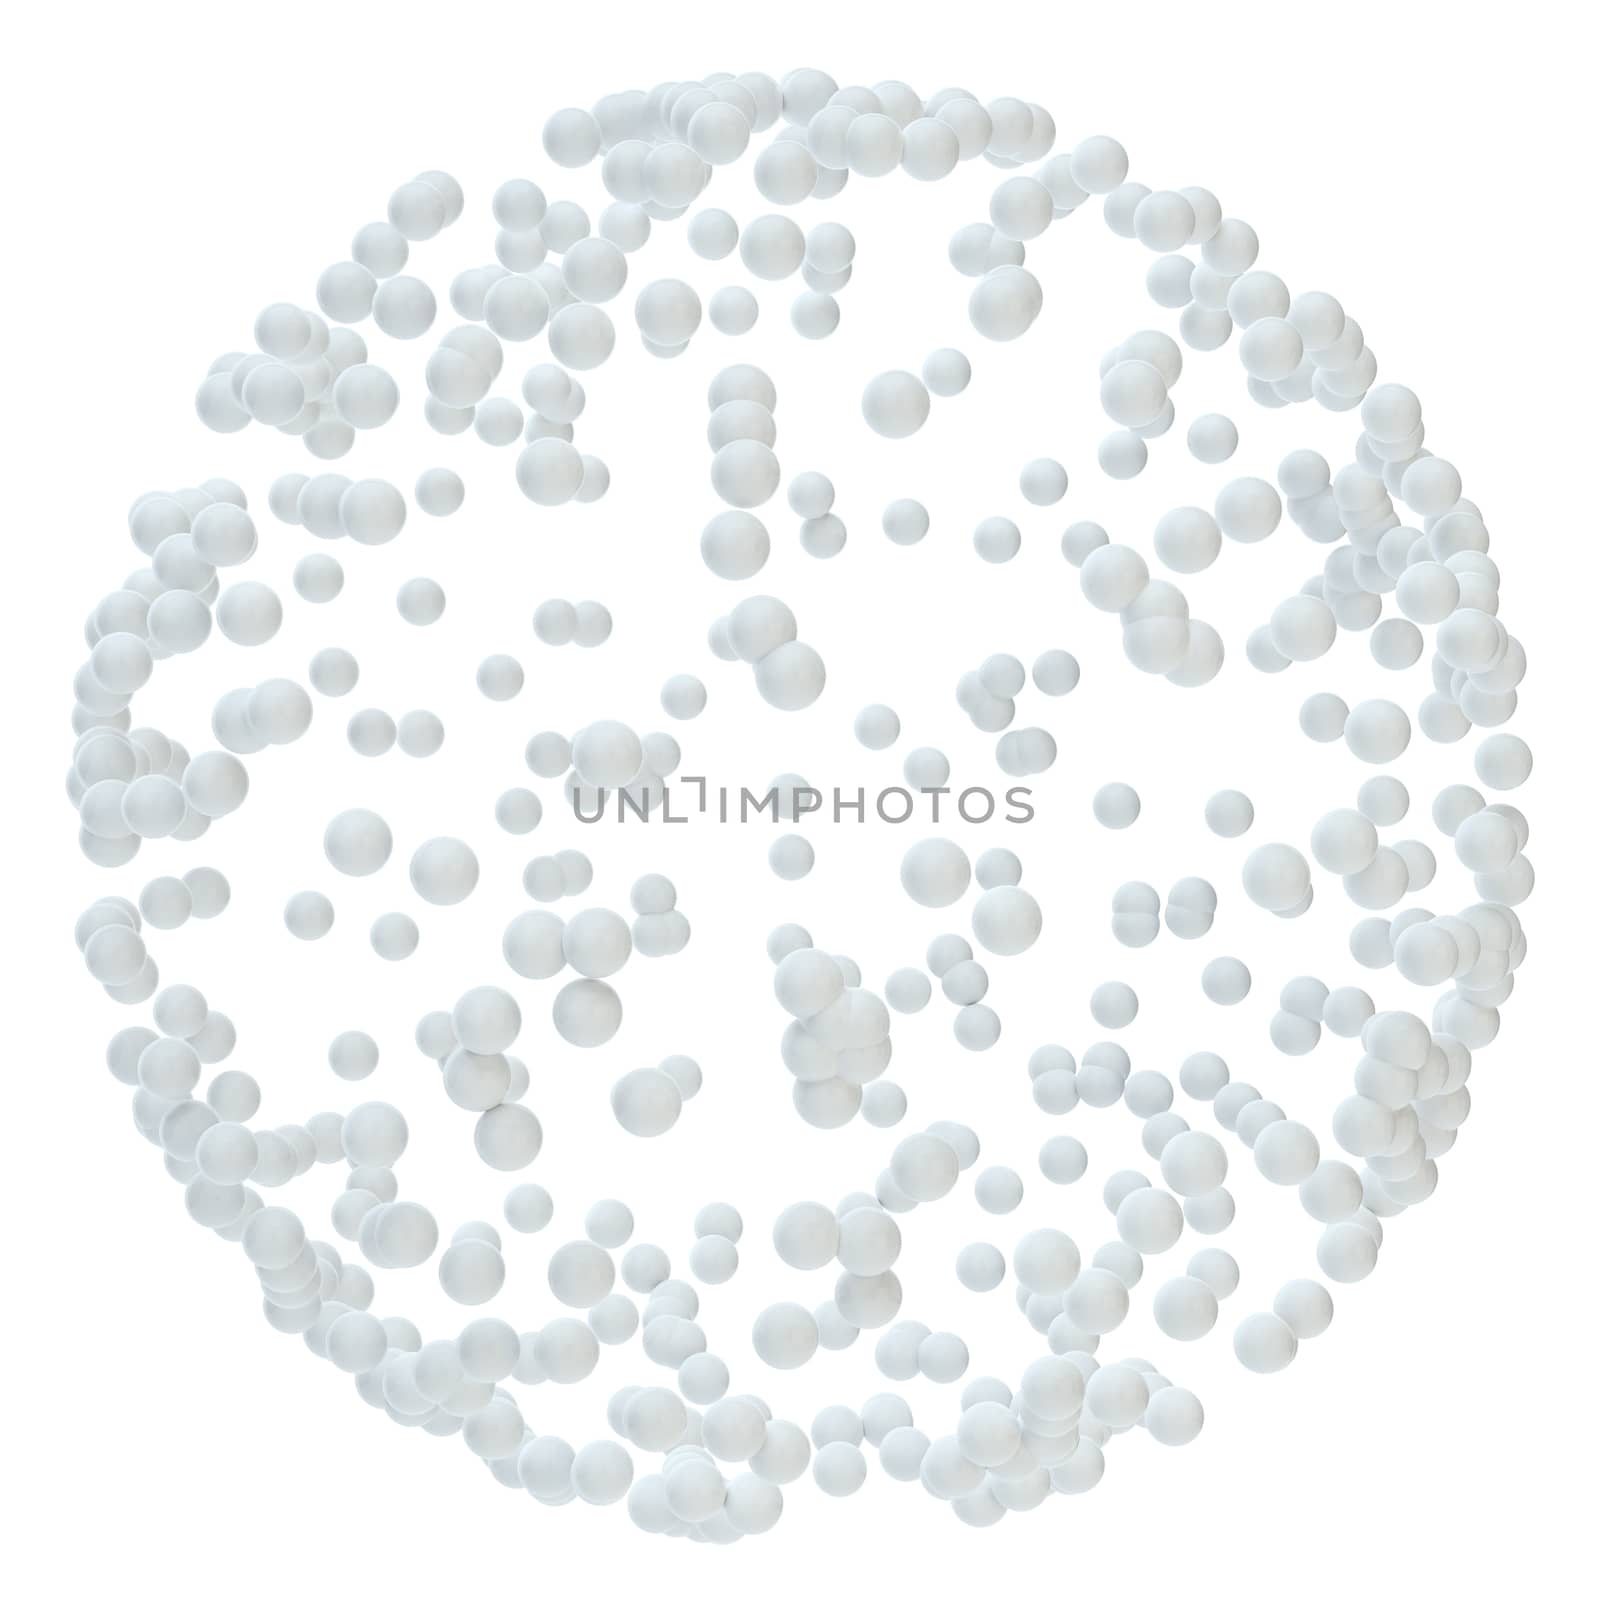 White abstract sphere consisting of small particles. 3d illustration. Template for your design